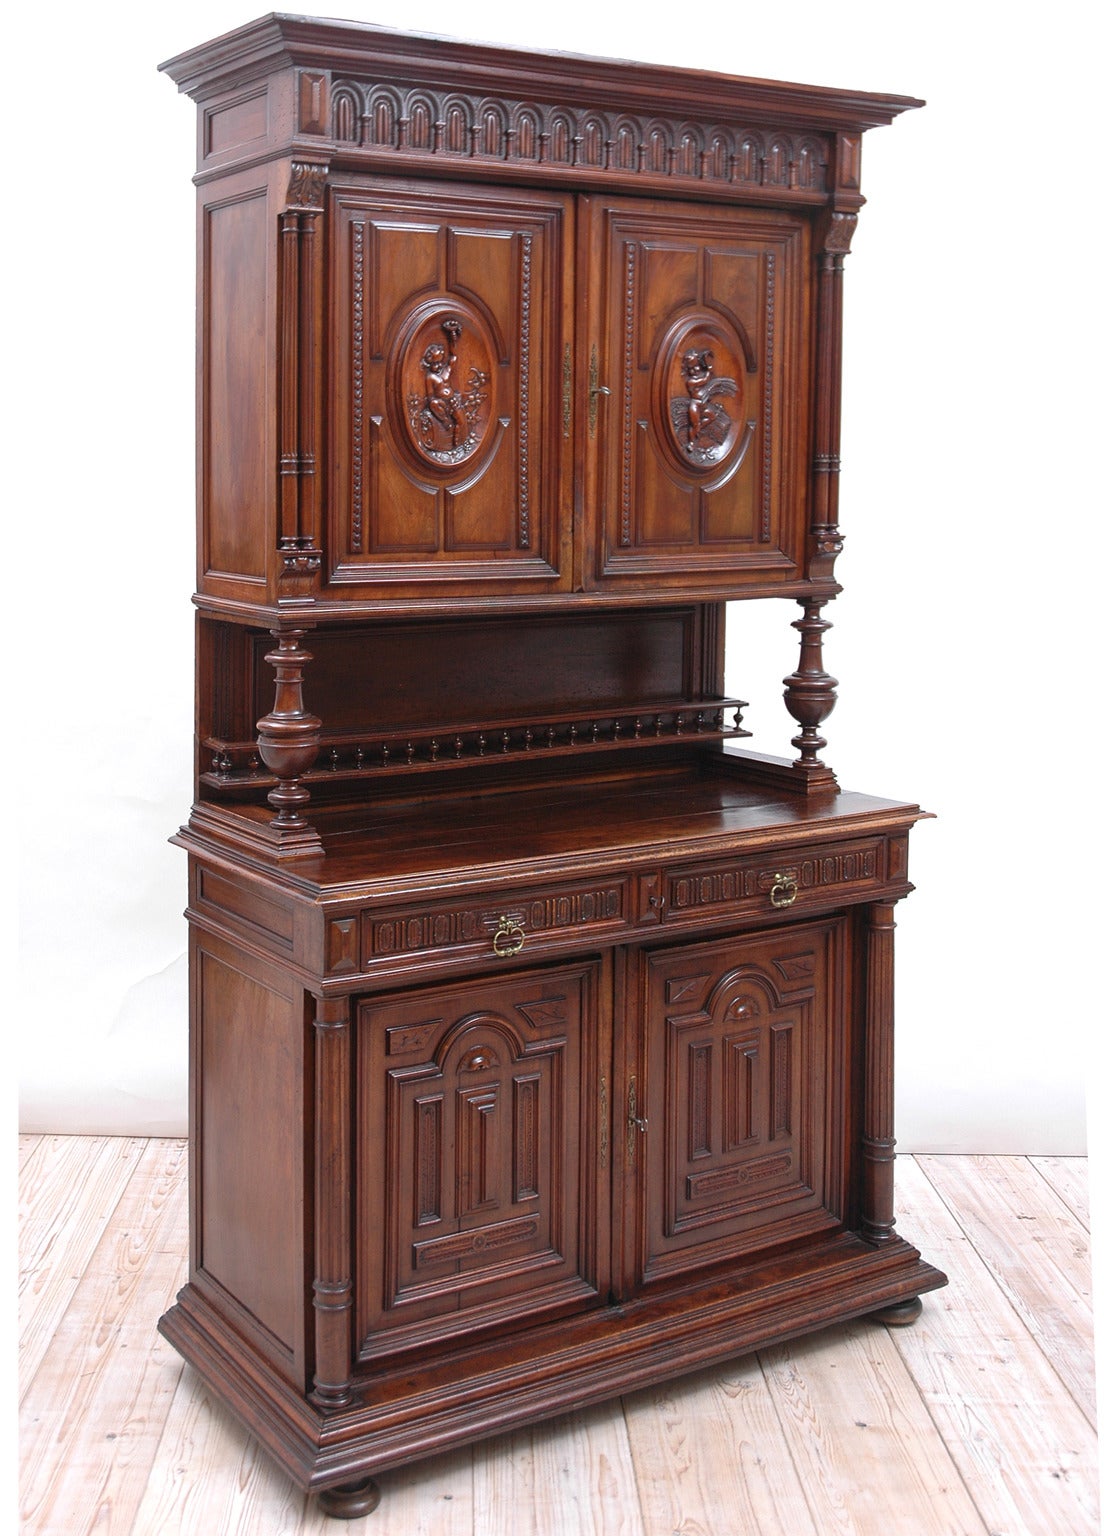 A lovely Belle Époque buffet in walnut in the style of Henri II of France with carvings of putti on the upper door panels, one holding a sickle and a bundle of wheat, and the other resting on a wine barrel while holding a cornucopia of grapes.